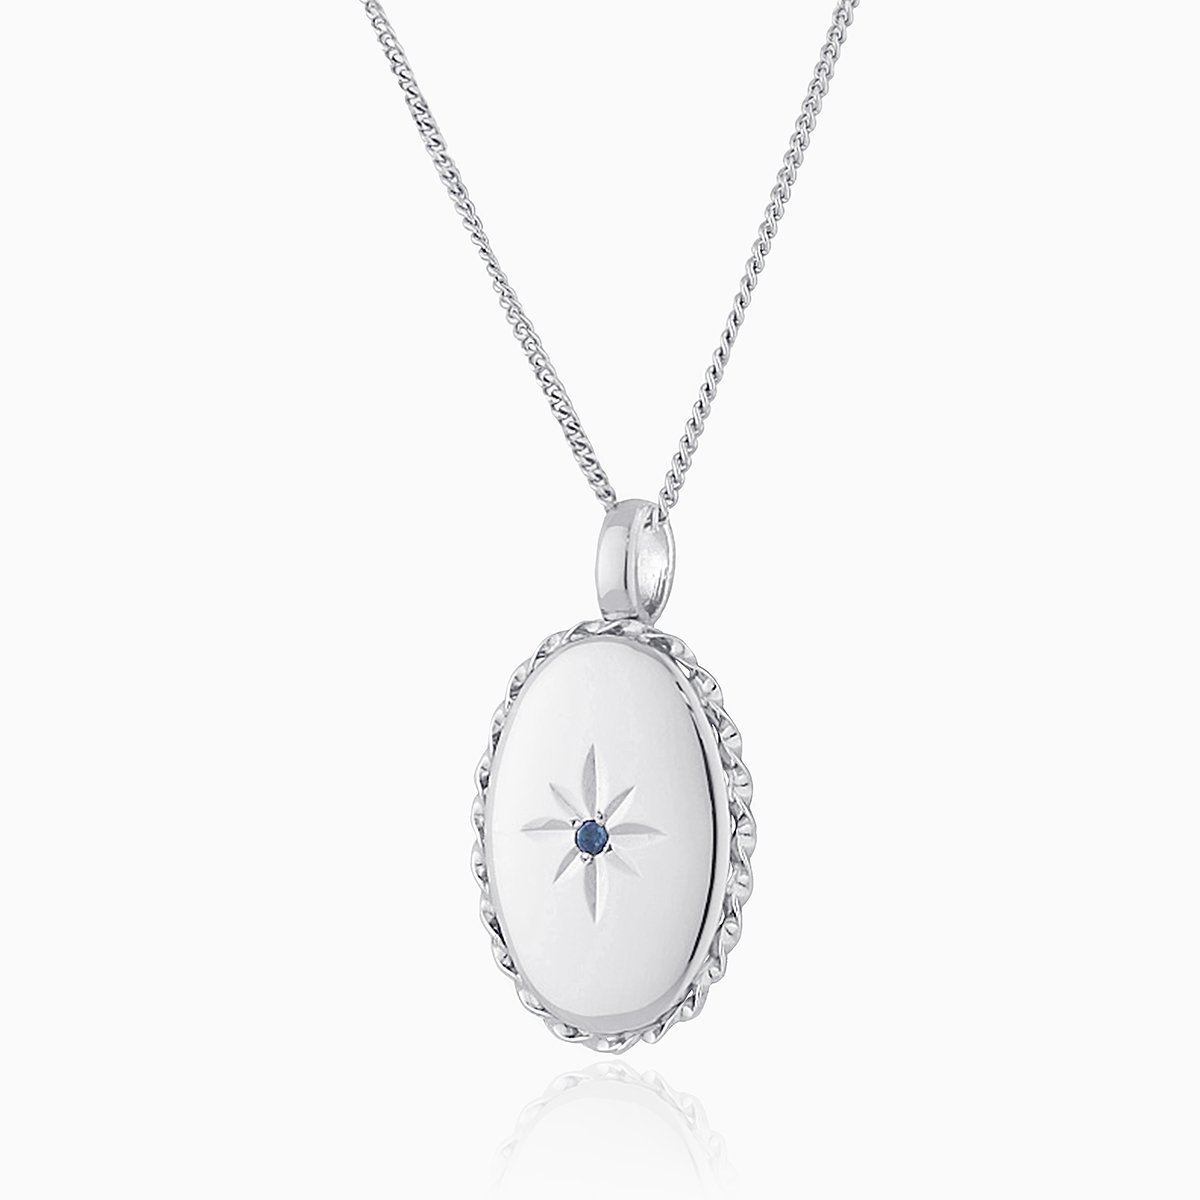 Product title: White Gold and Sapphire Locket, product type: Locket